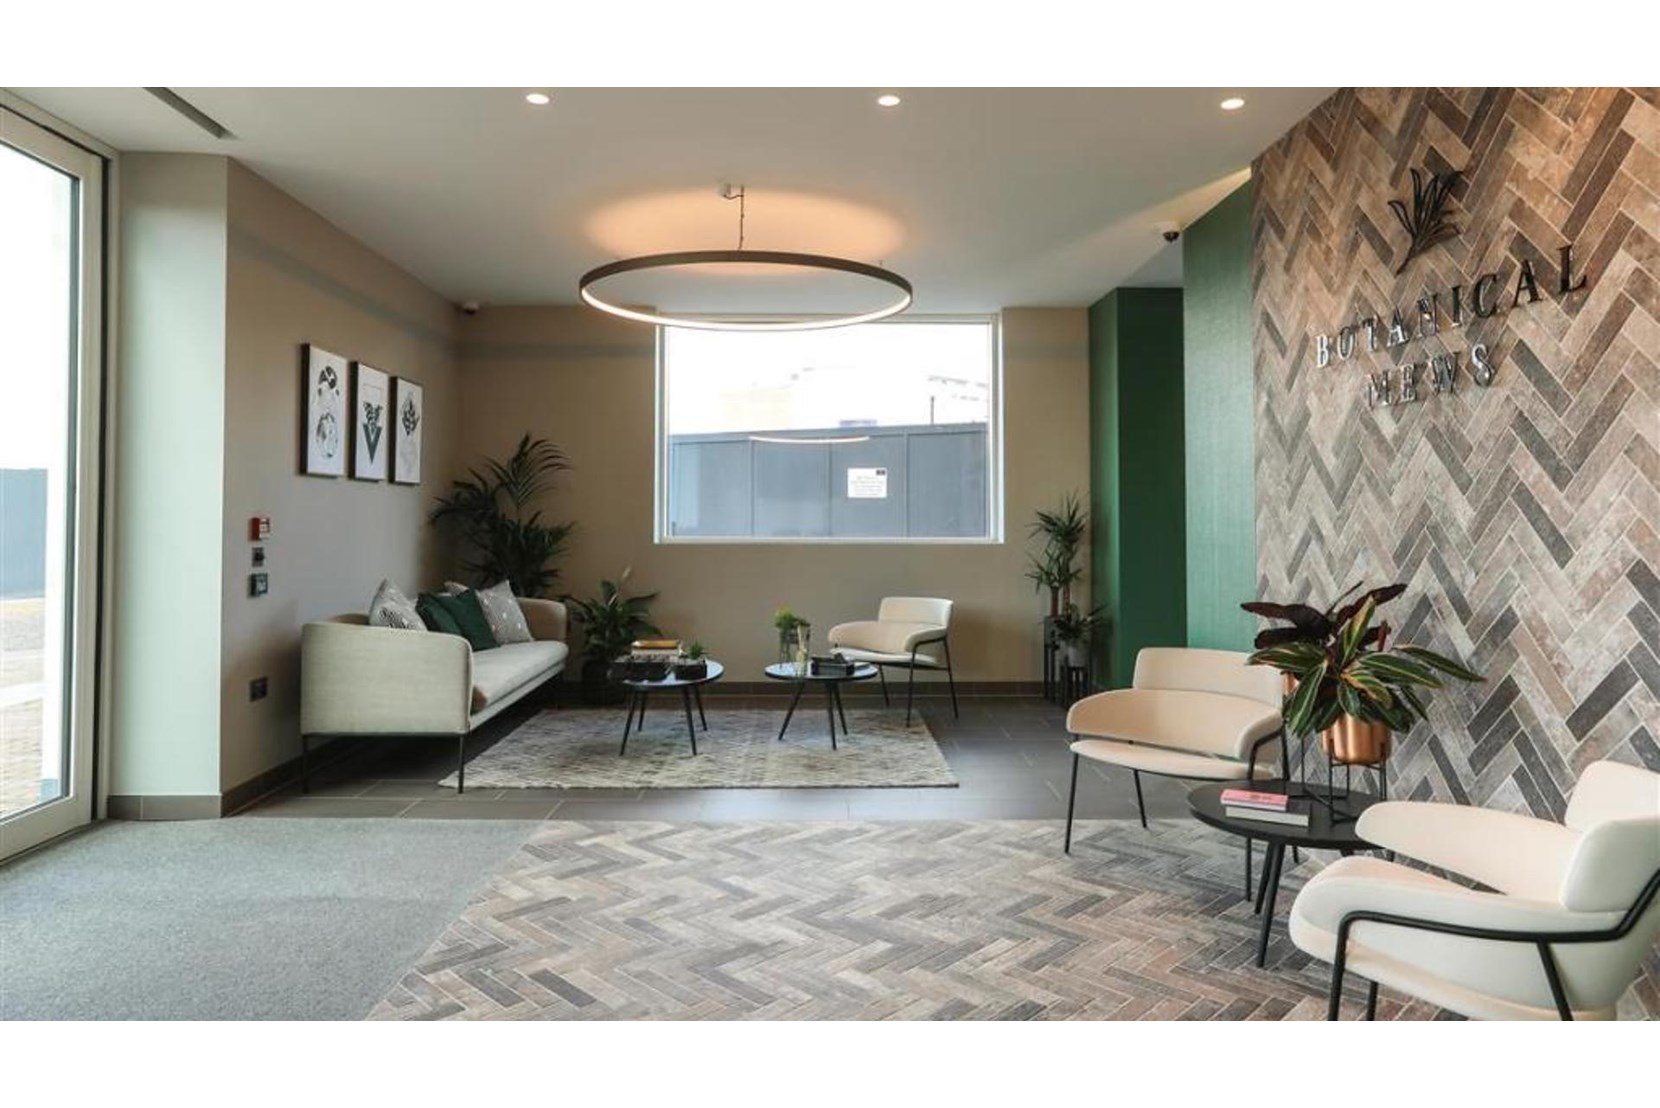 Houses and Apartments to Rent by JLL at Sugar House Island, Newham, E15, communal lounge area